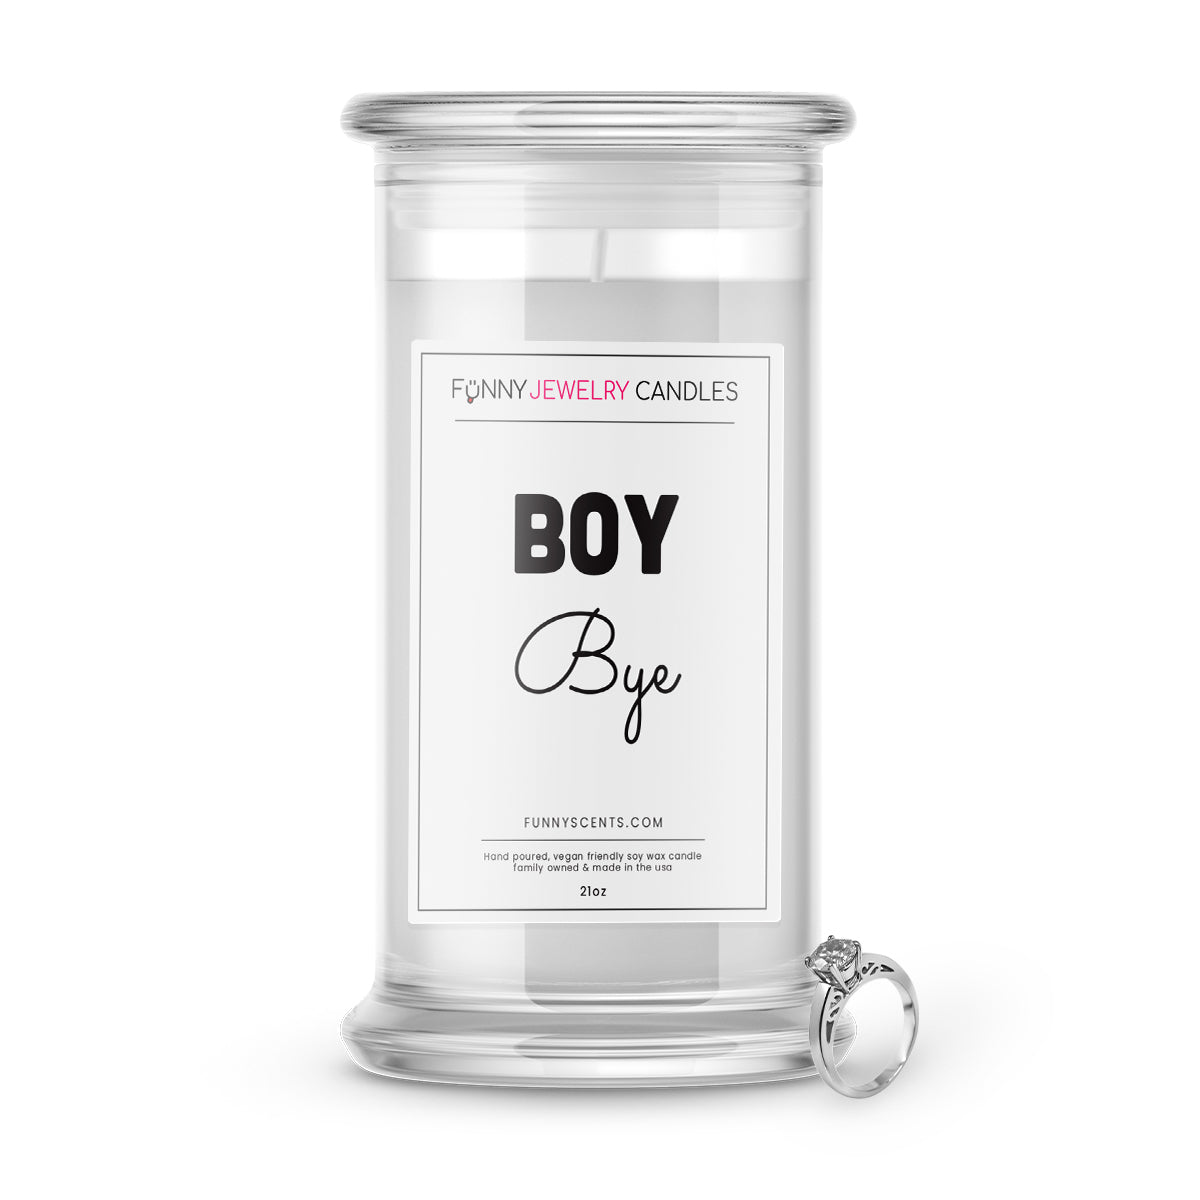 Boy Bye Jewelry Funny Candles